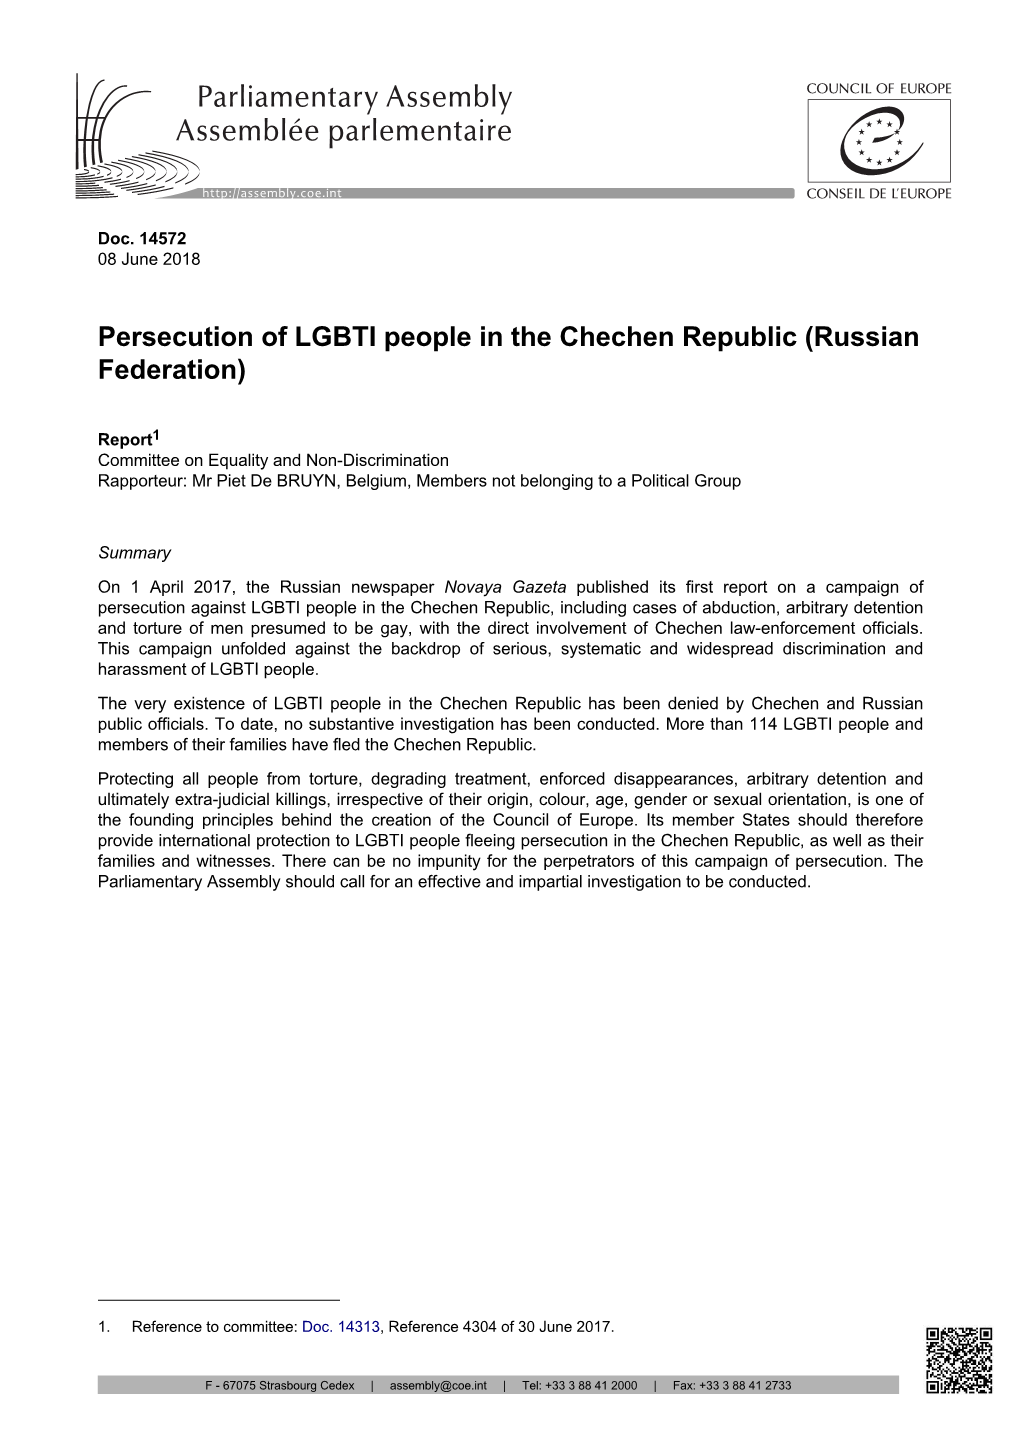 Persecution of LGBTI People in the Chechen Republic (Russian Federation)